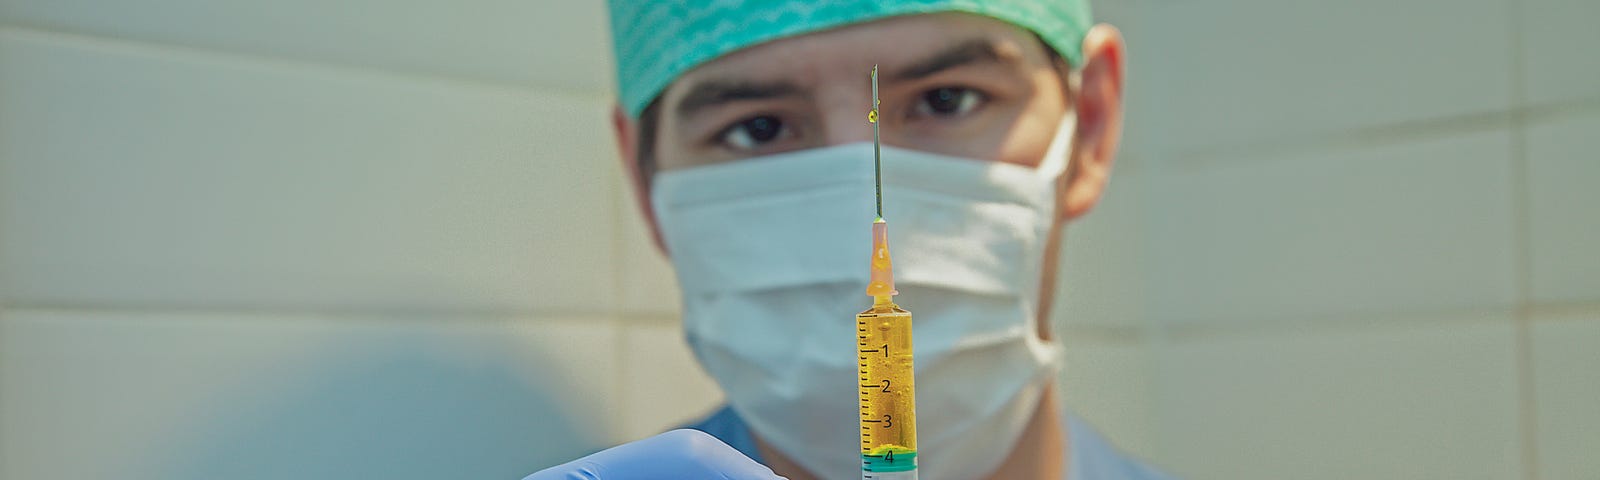 A health care professional, wearing a mask and dressed in scrubs, holds up a syringe, ready to give someone an injection.